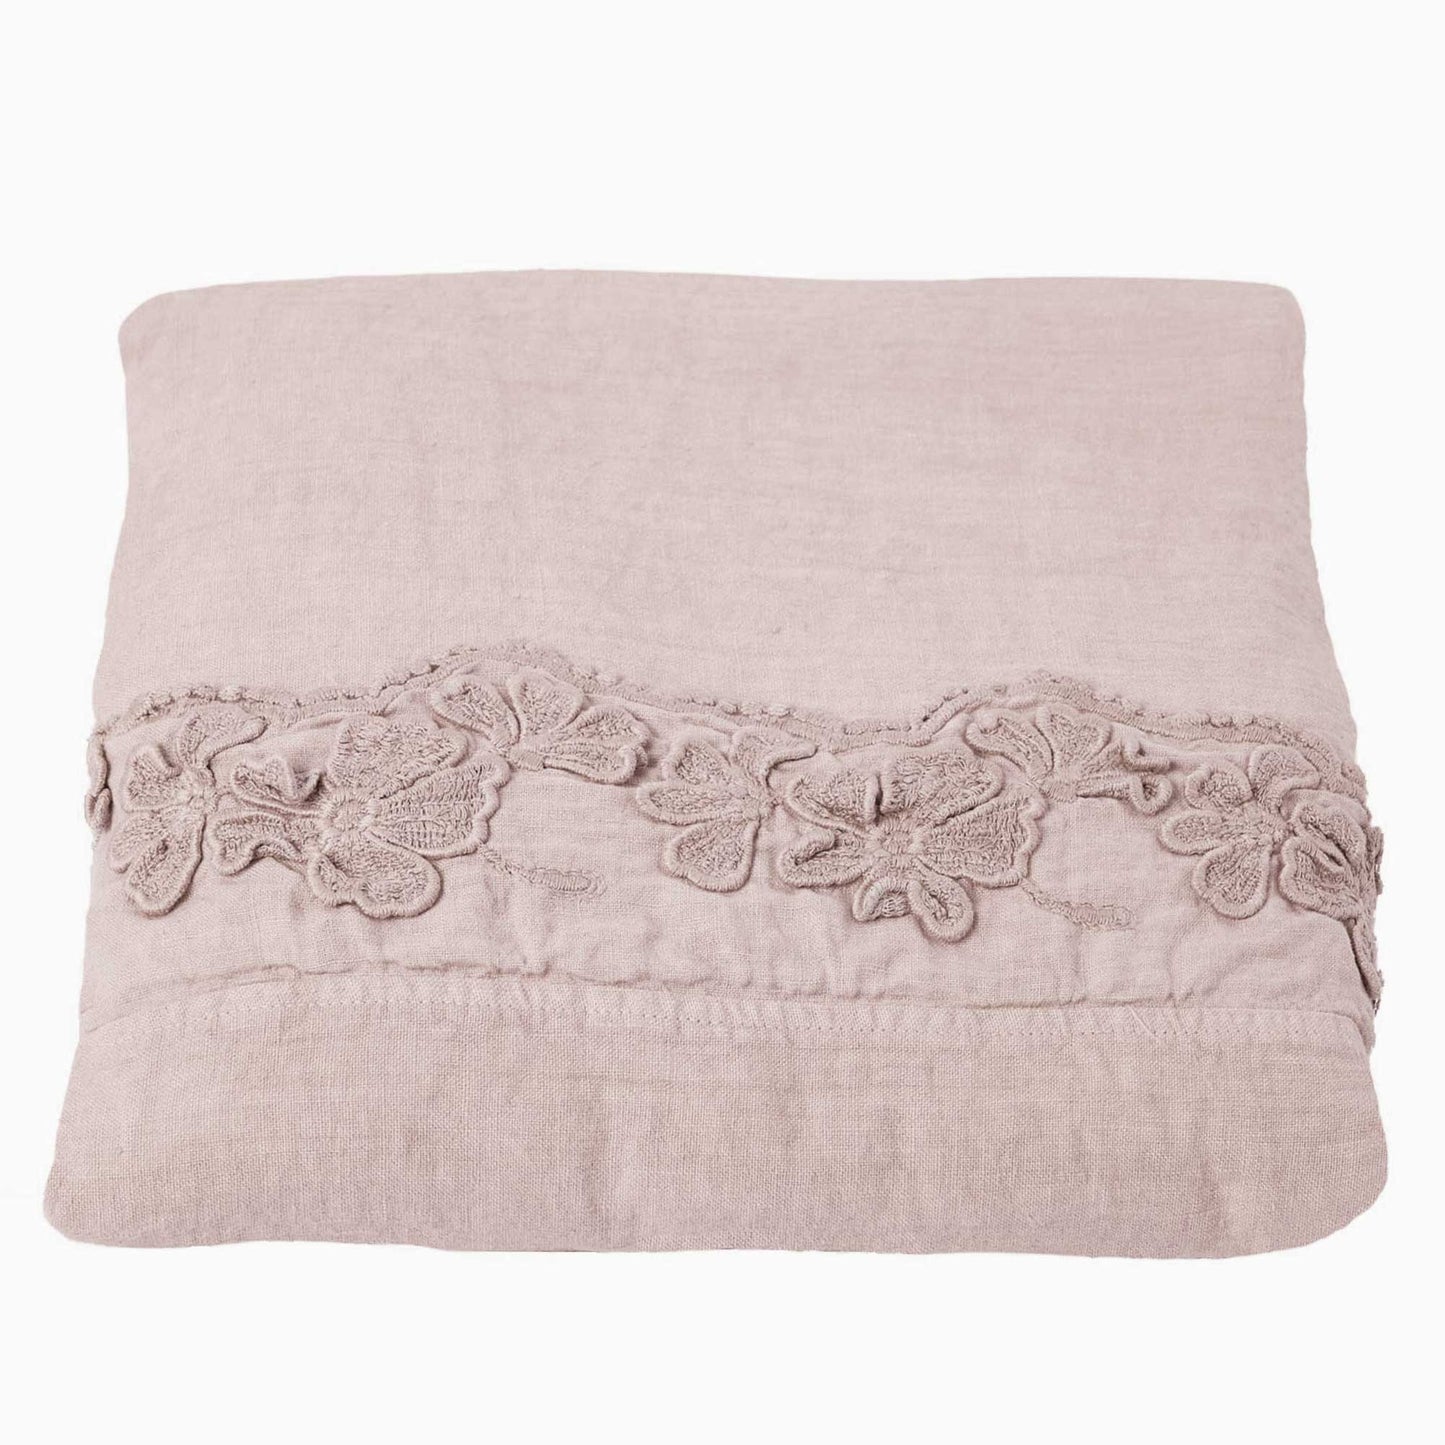 Petal embroidery bedspread, square and a half * while supplies last